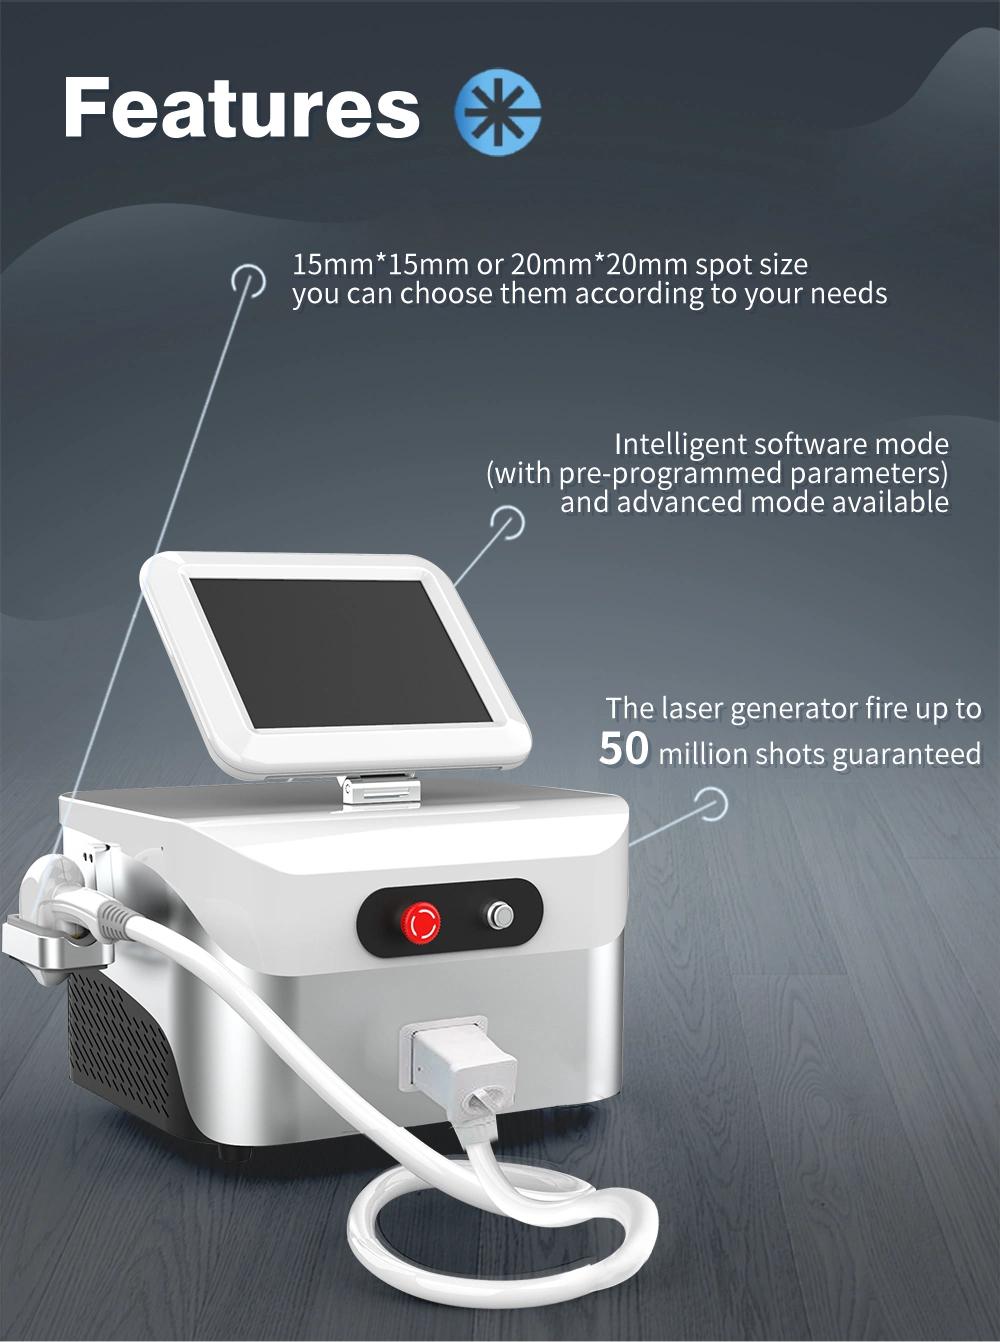 Beauty Machine Laser Tattoo Removal Painless for All Body Parts Adopt Hair Equipped Multifunction Hair Removal Machine